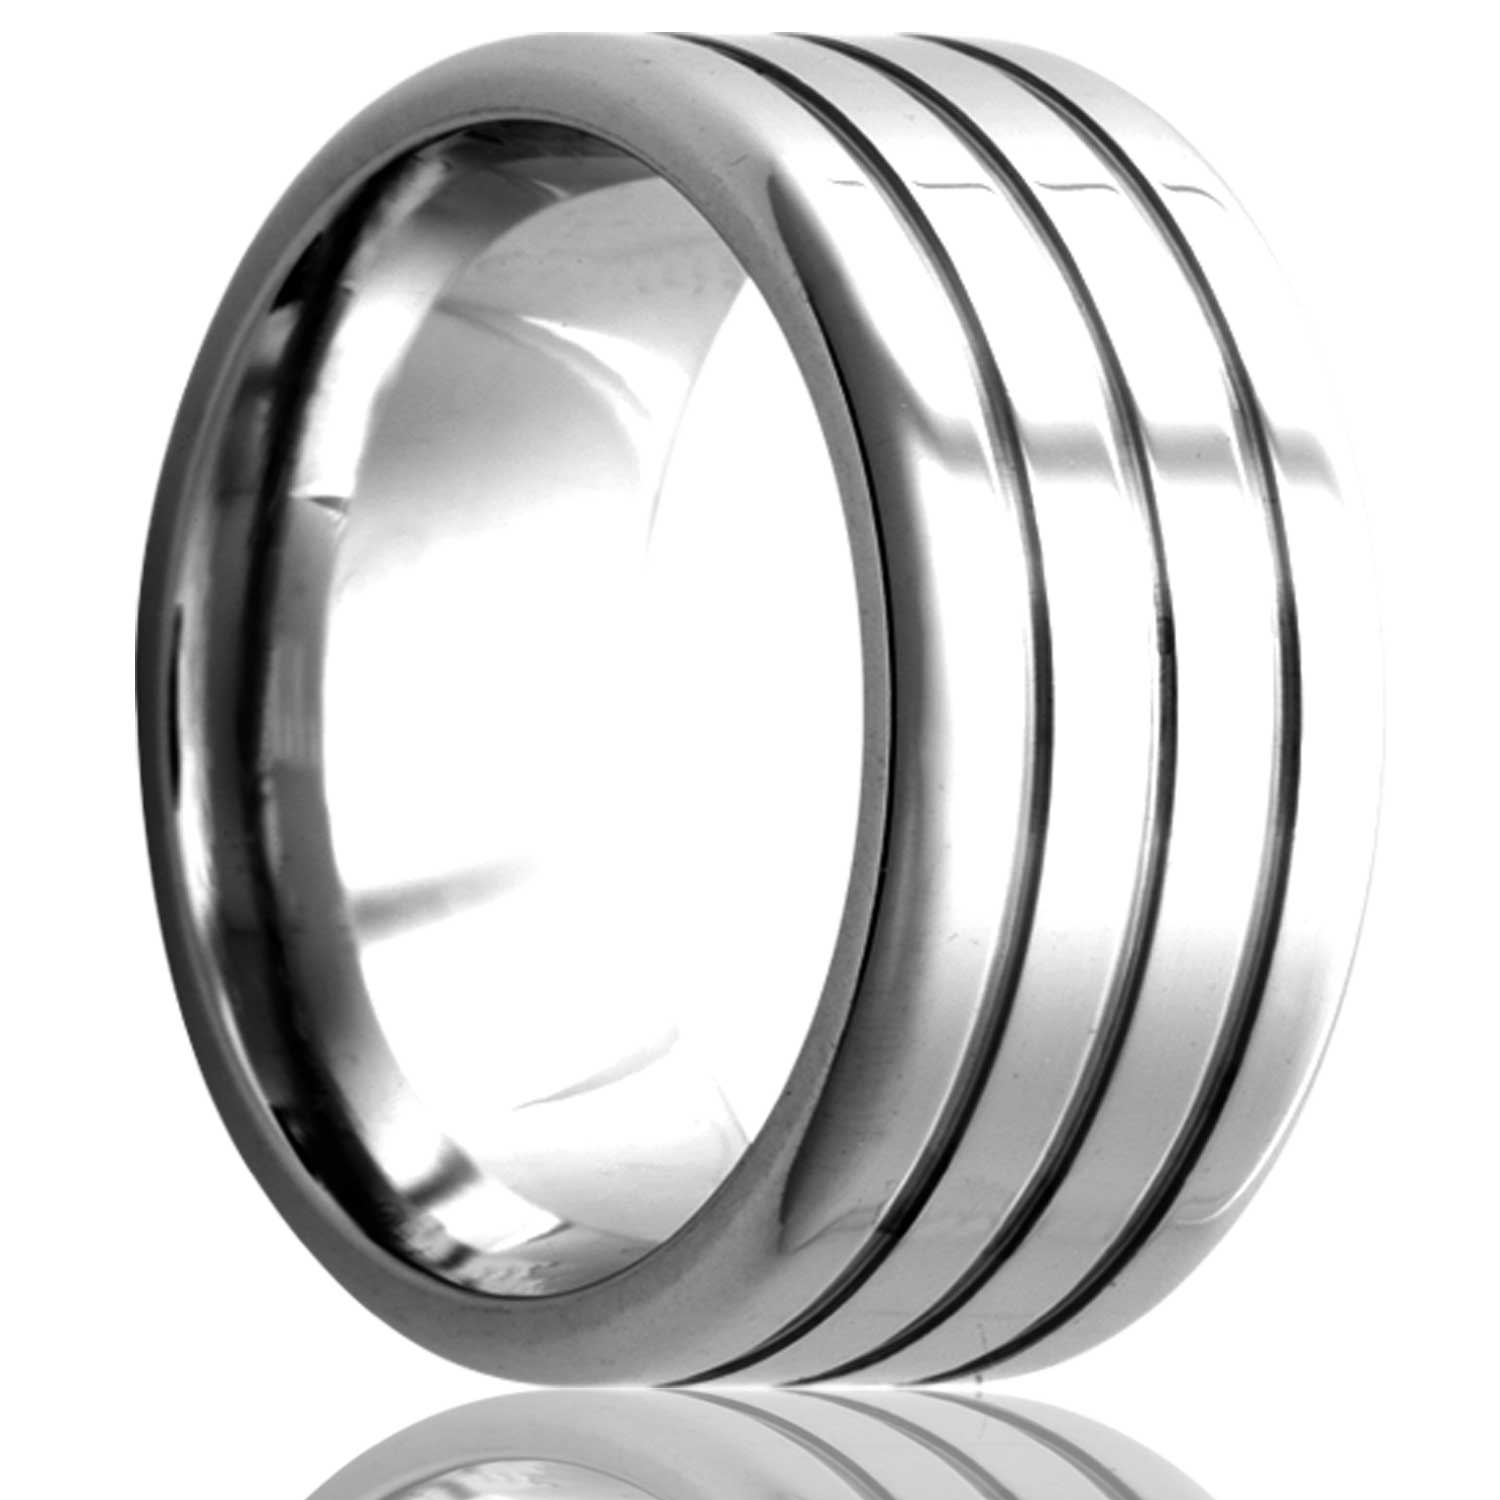 A triple grooved tungsten wedding displayed on a neutral white background.